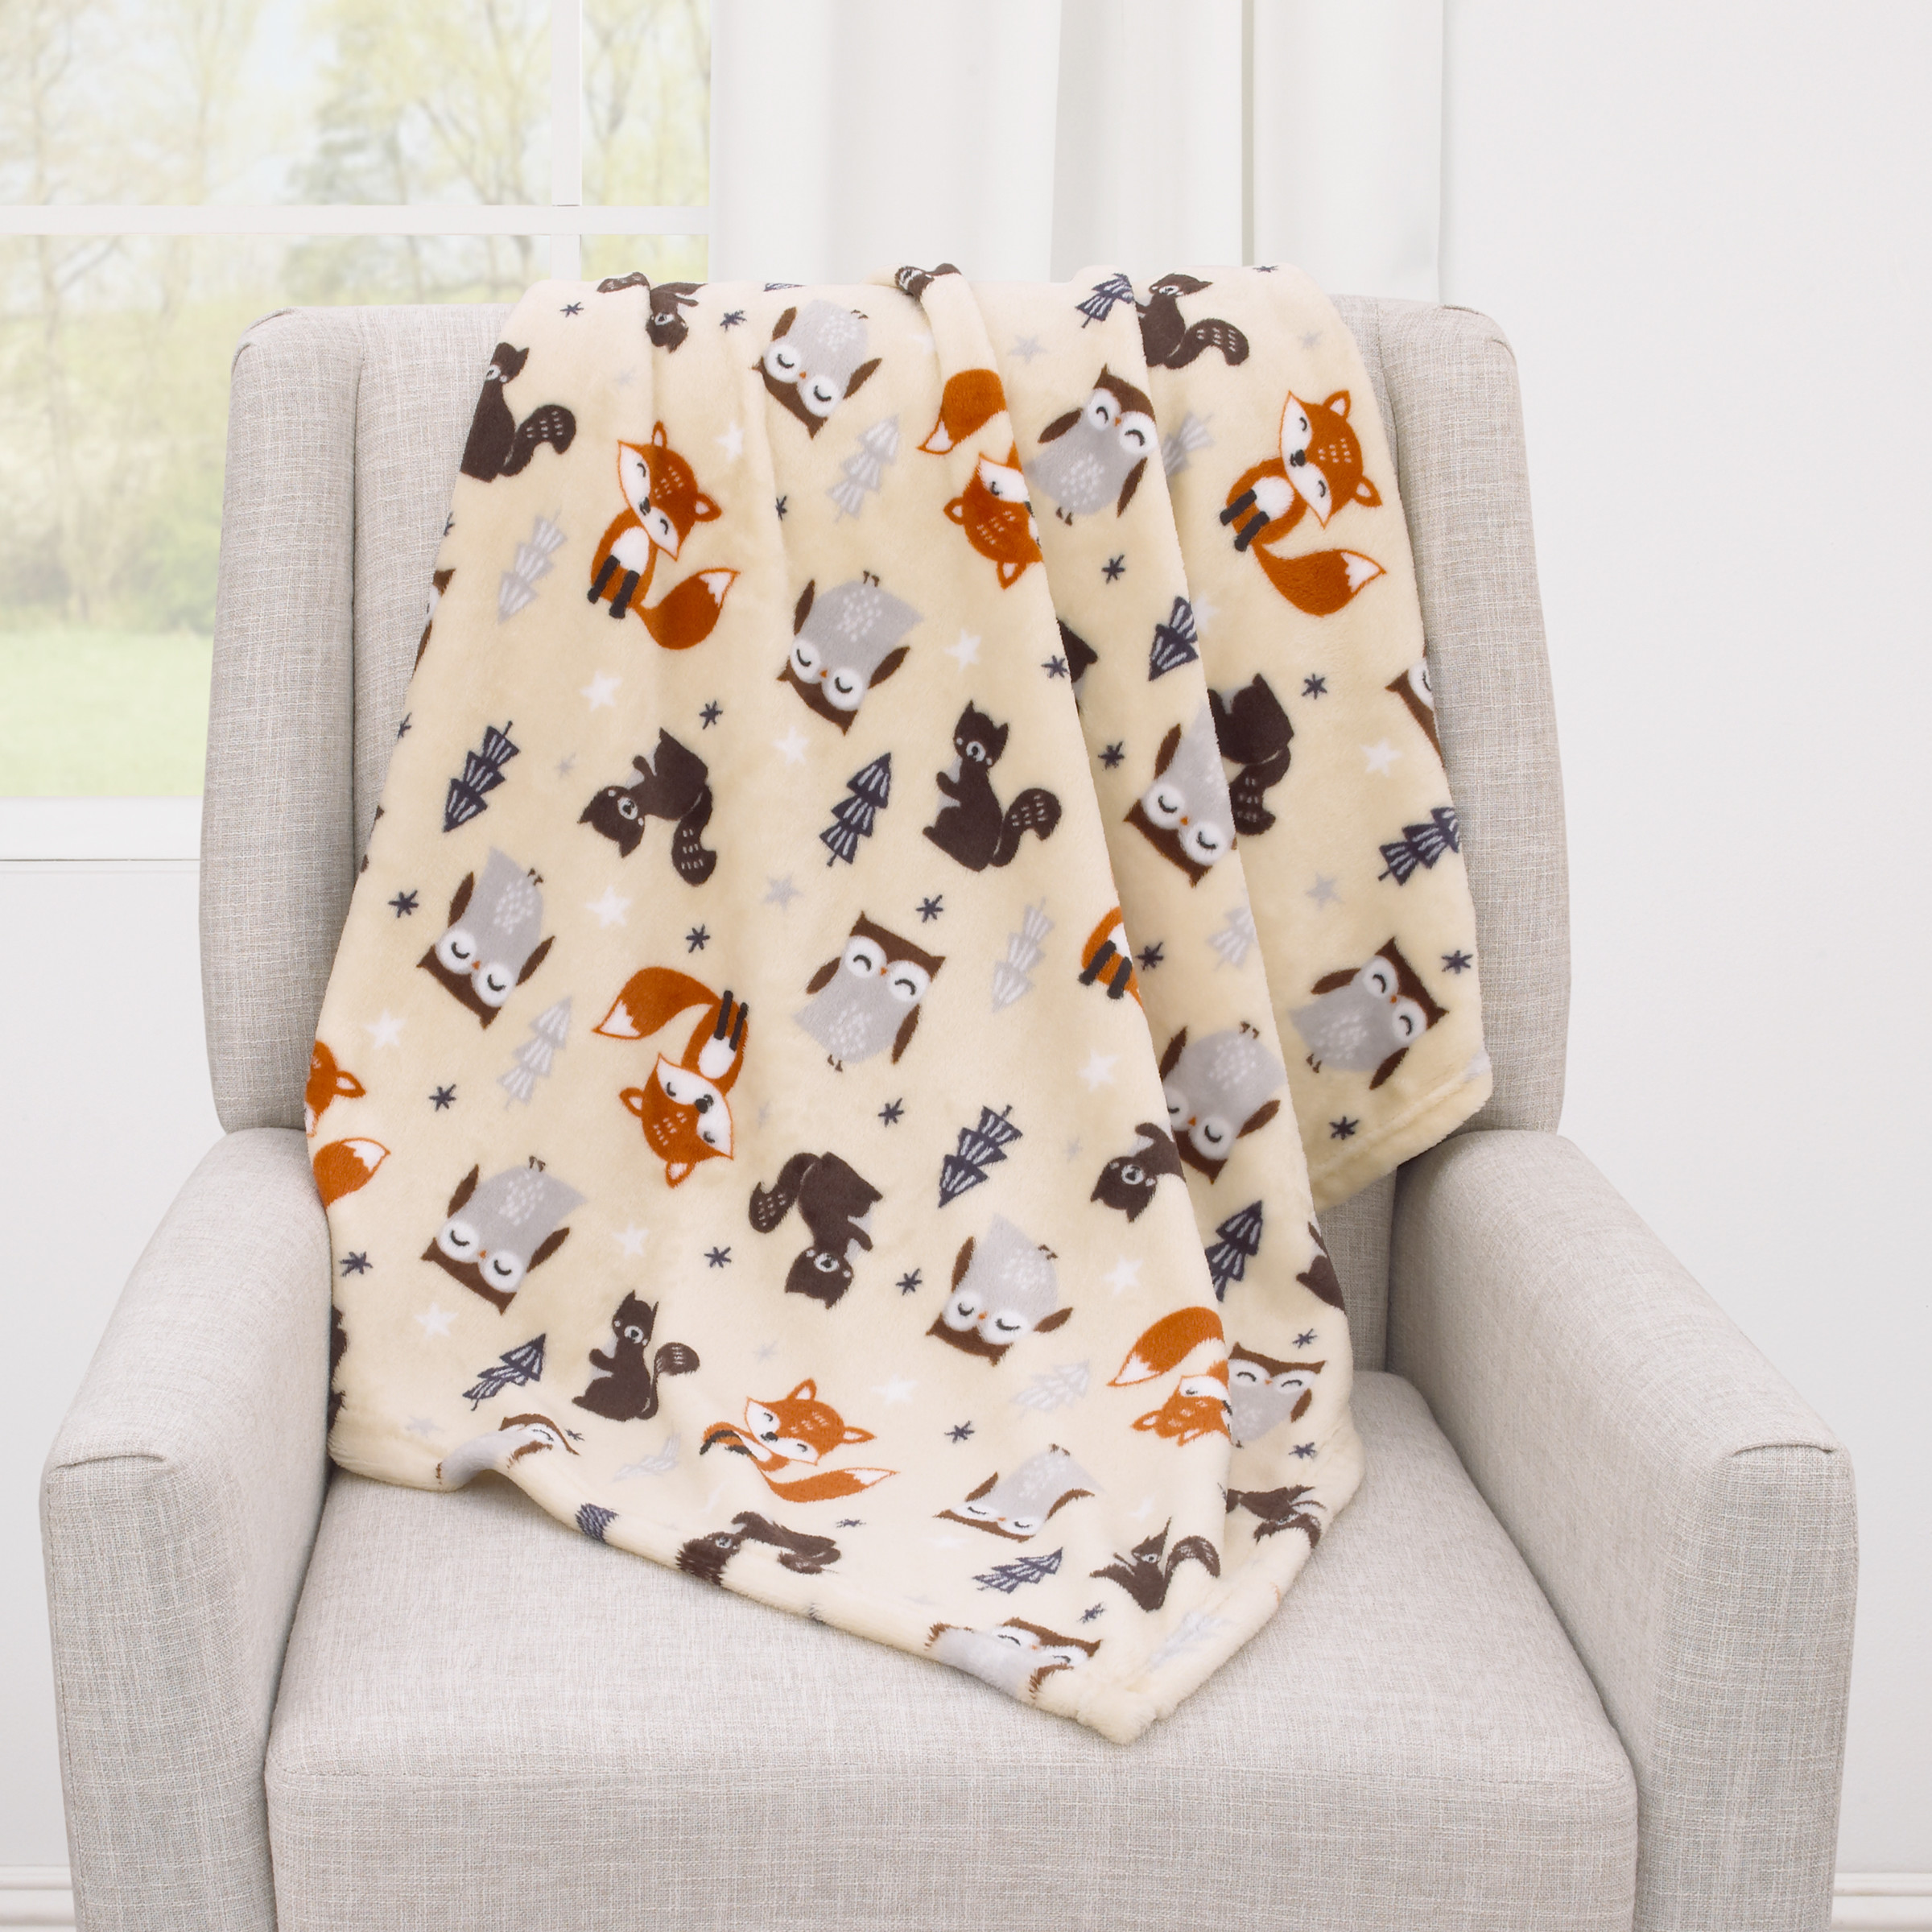 Parent's Choice Fox Woodland Baby Blanket, 30x36 inches - image 3 of 6